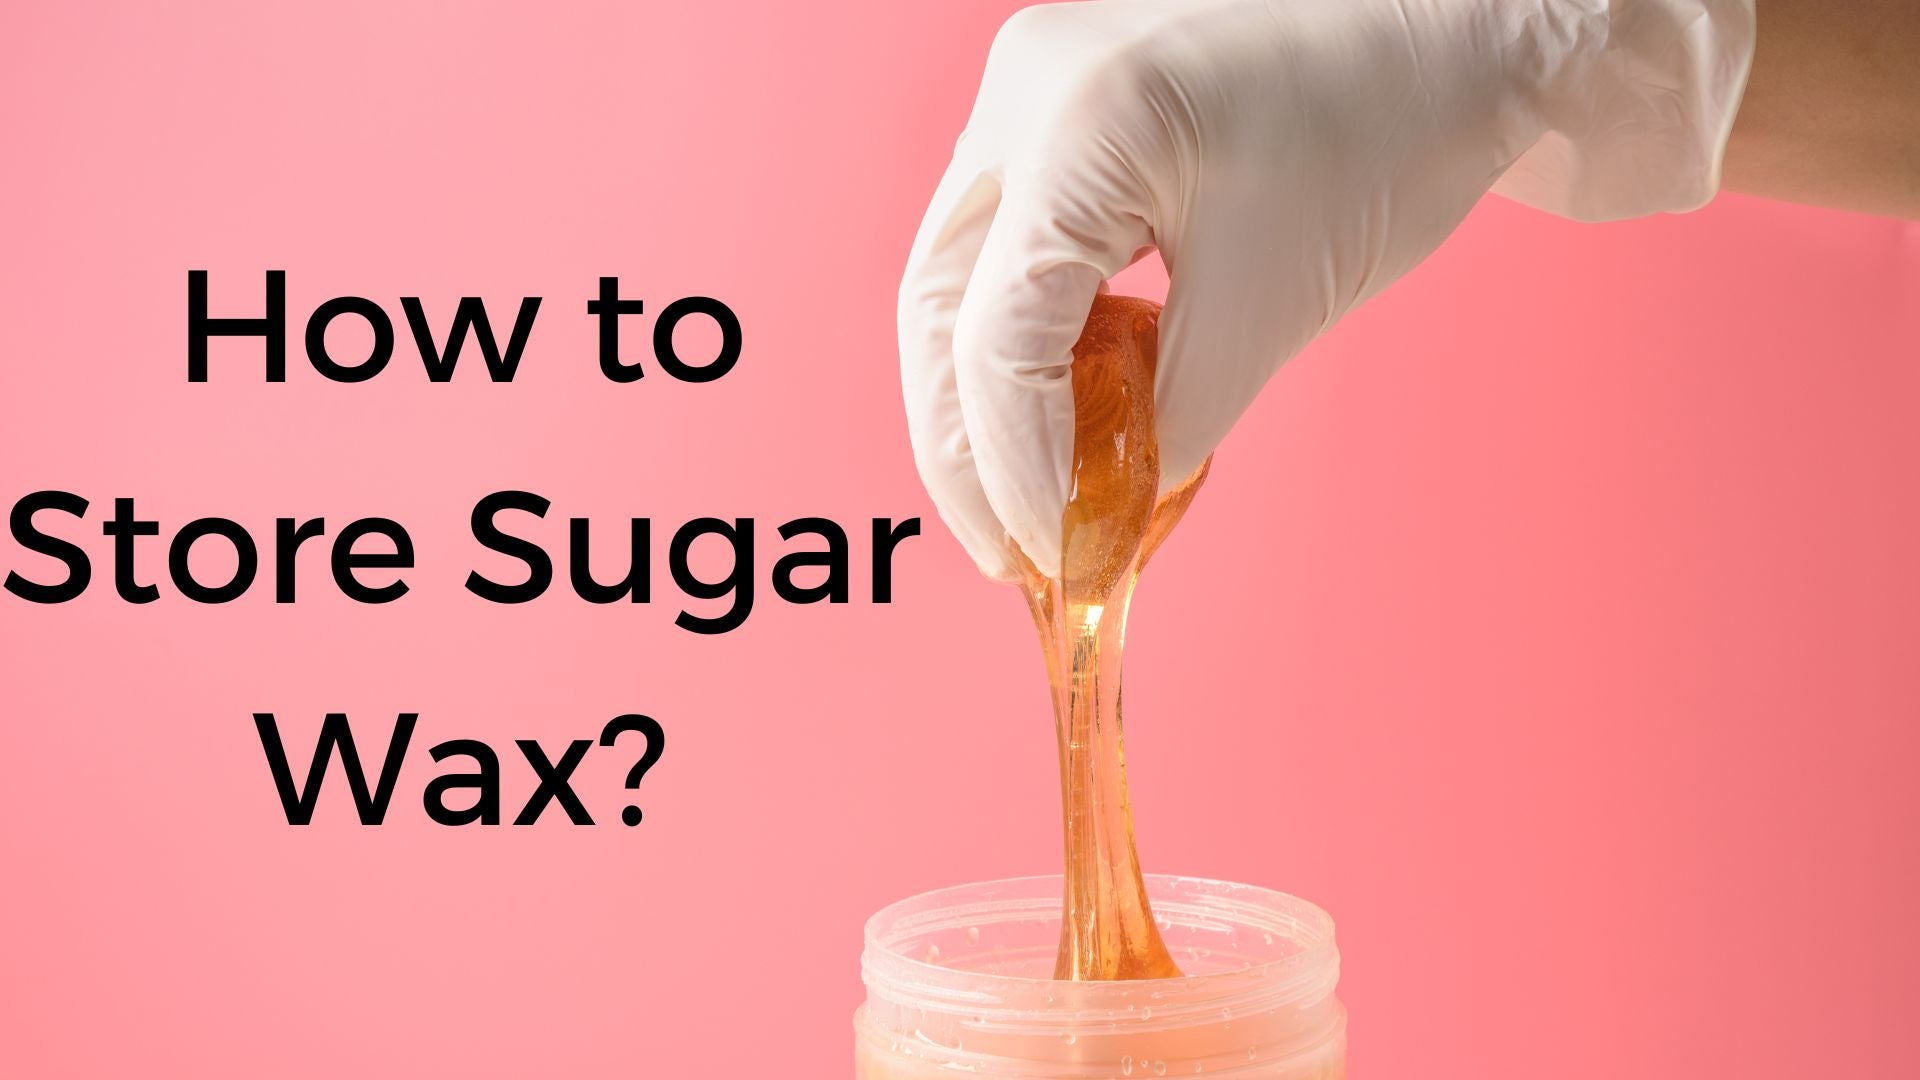 How-to-store-sugar-wax